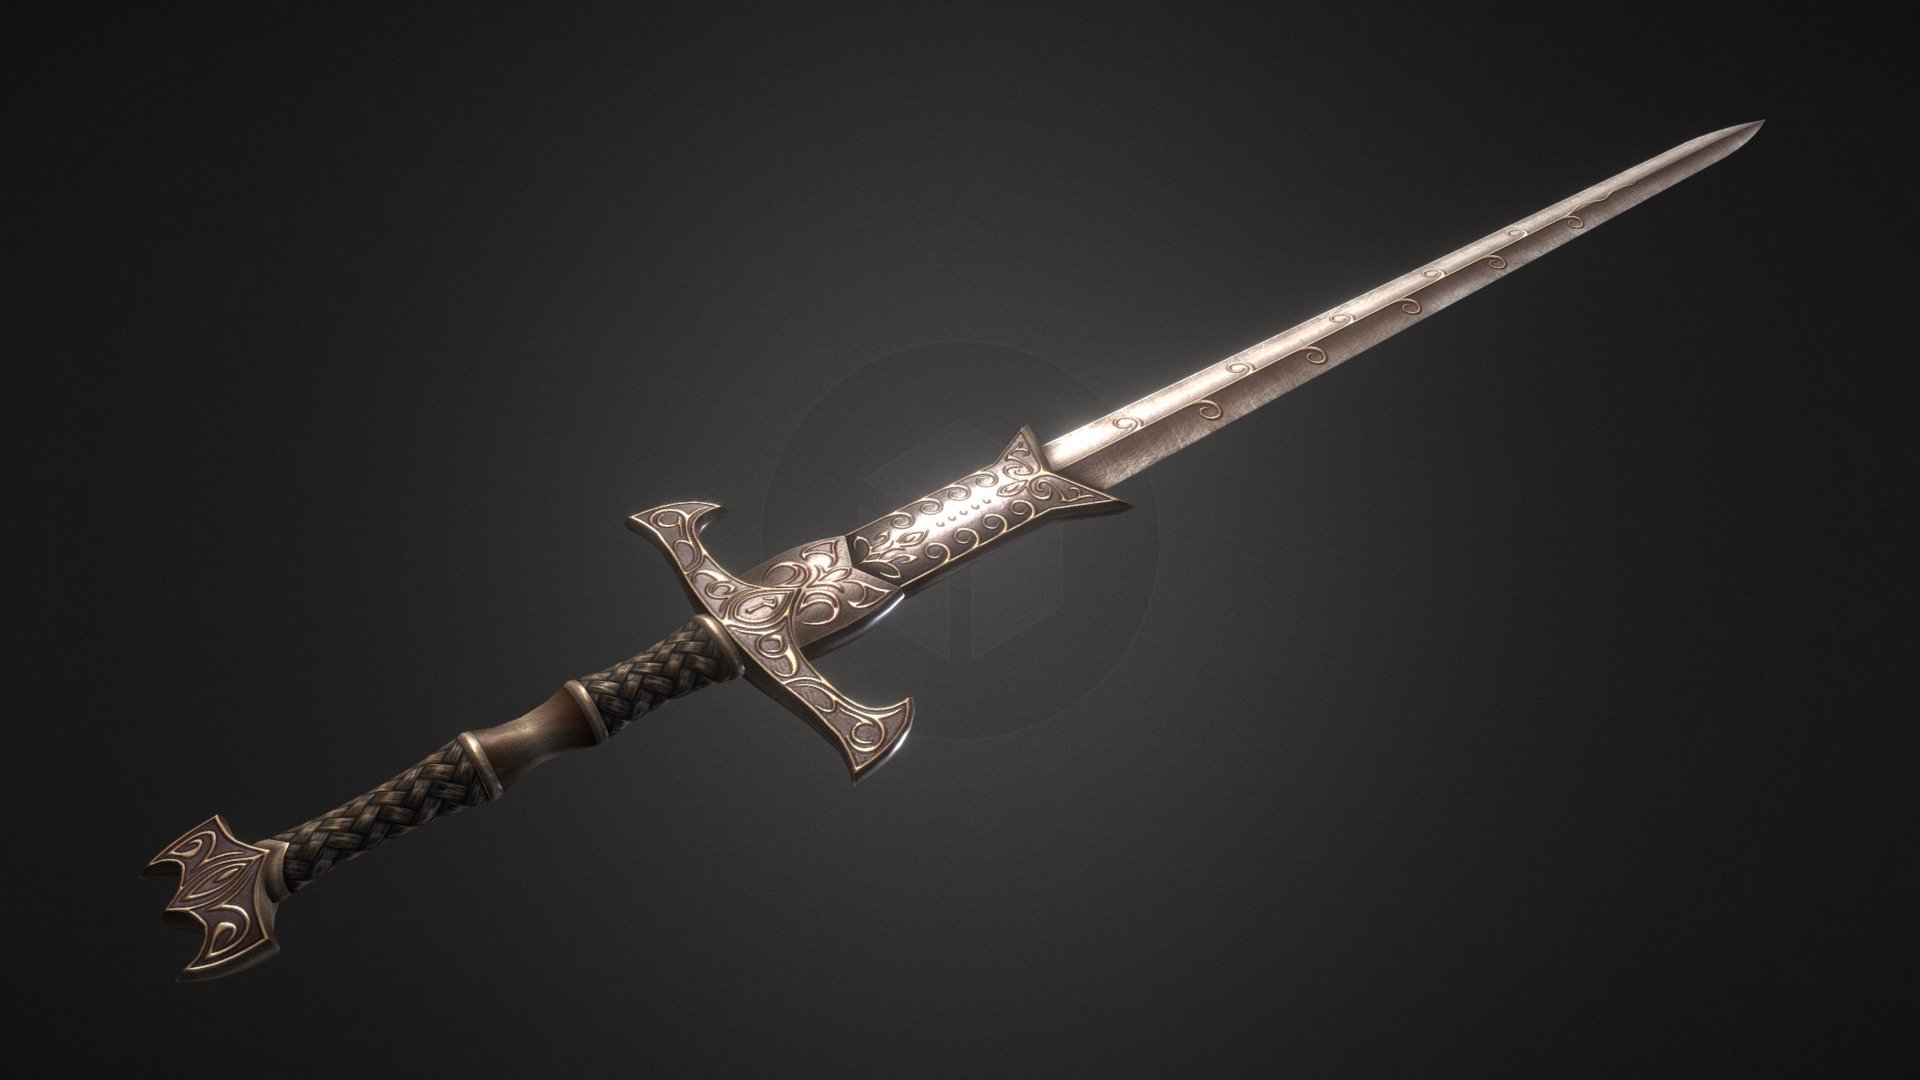 The weapon I created for upcoming Dragonborn Odyssey add-on for Skyrim by Icecreamassassin. Check out his amazing Legacy of the Dragonborn expansion on Skyrimnexus.

Also check out his Mod blog and Patreon page to see more info about upcoming add-on 3d model